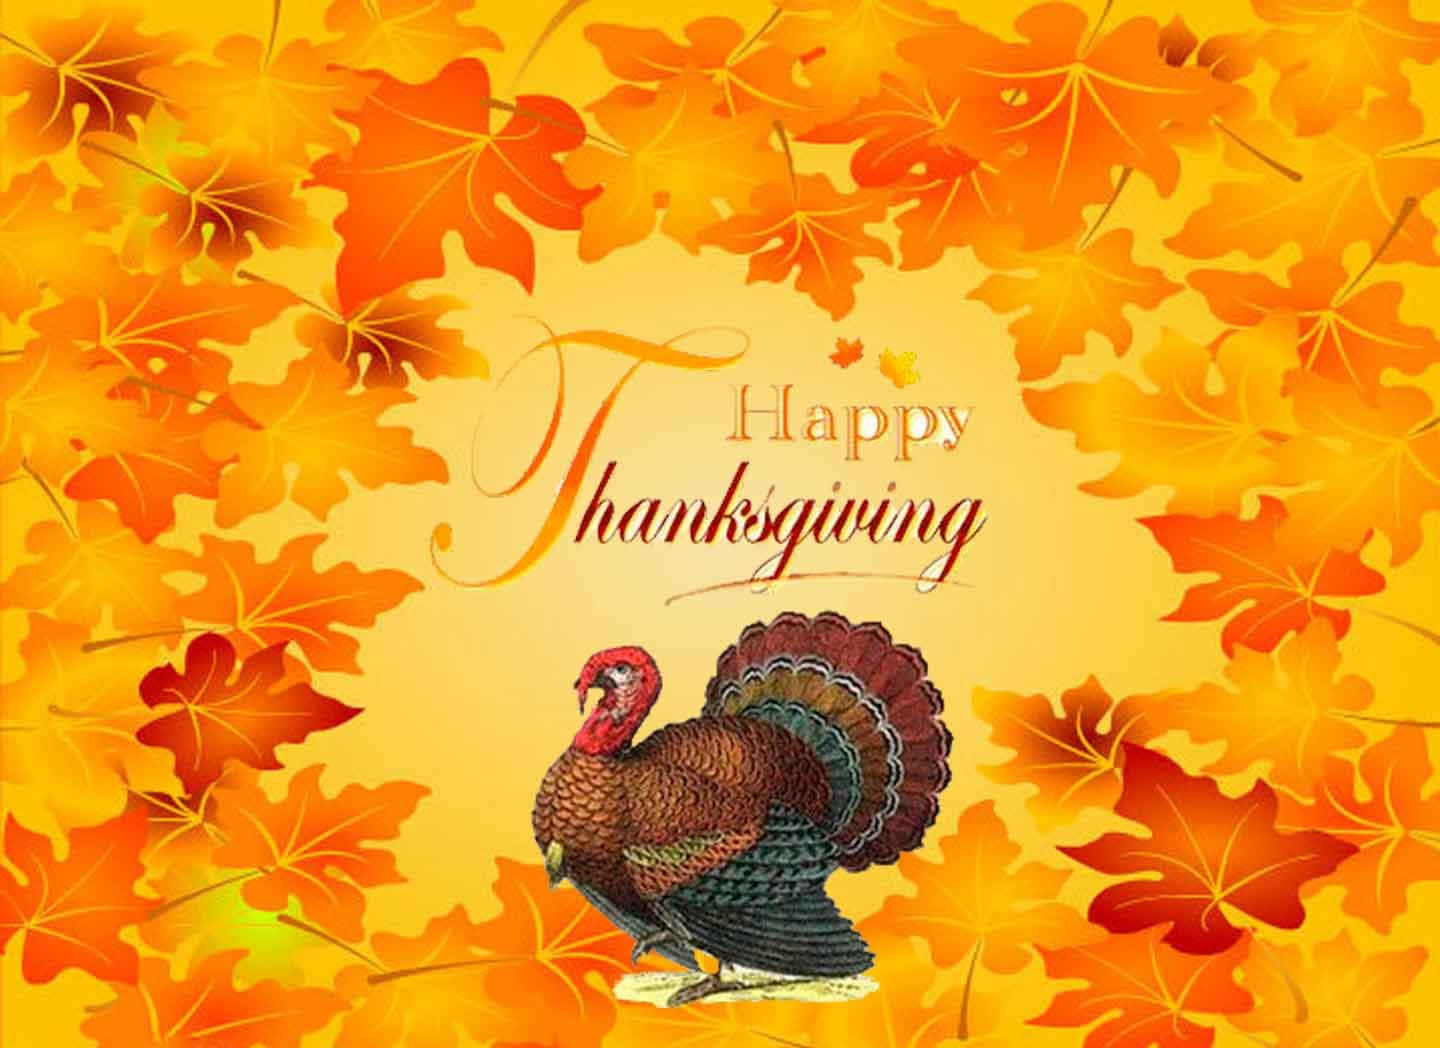 Wishing You Peace, Joy And A Happy Thanksgiving